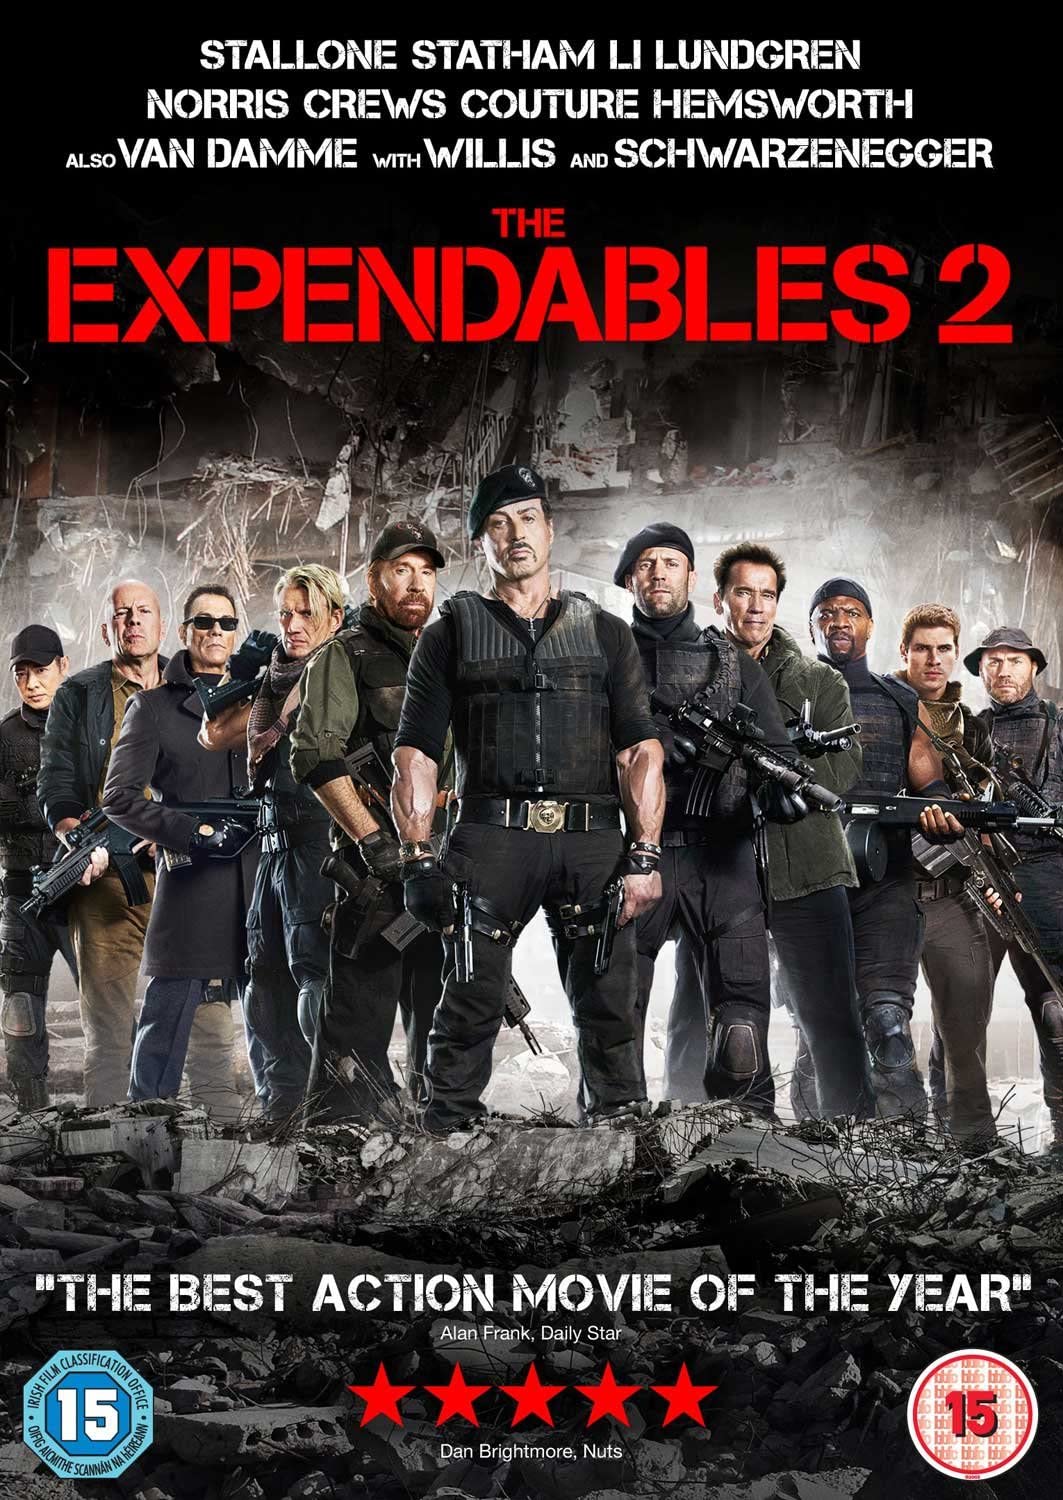 The Expendables 2 - Action [DVD]